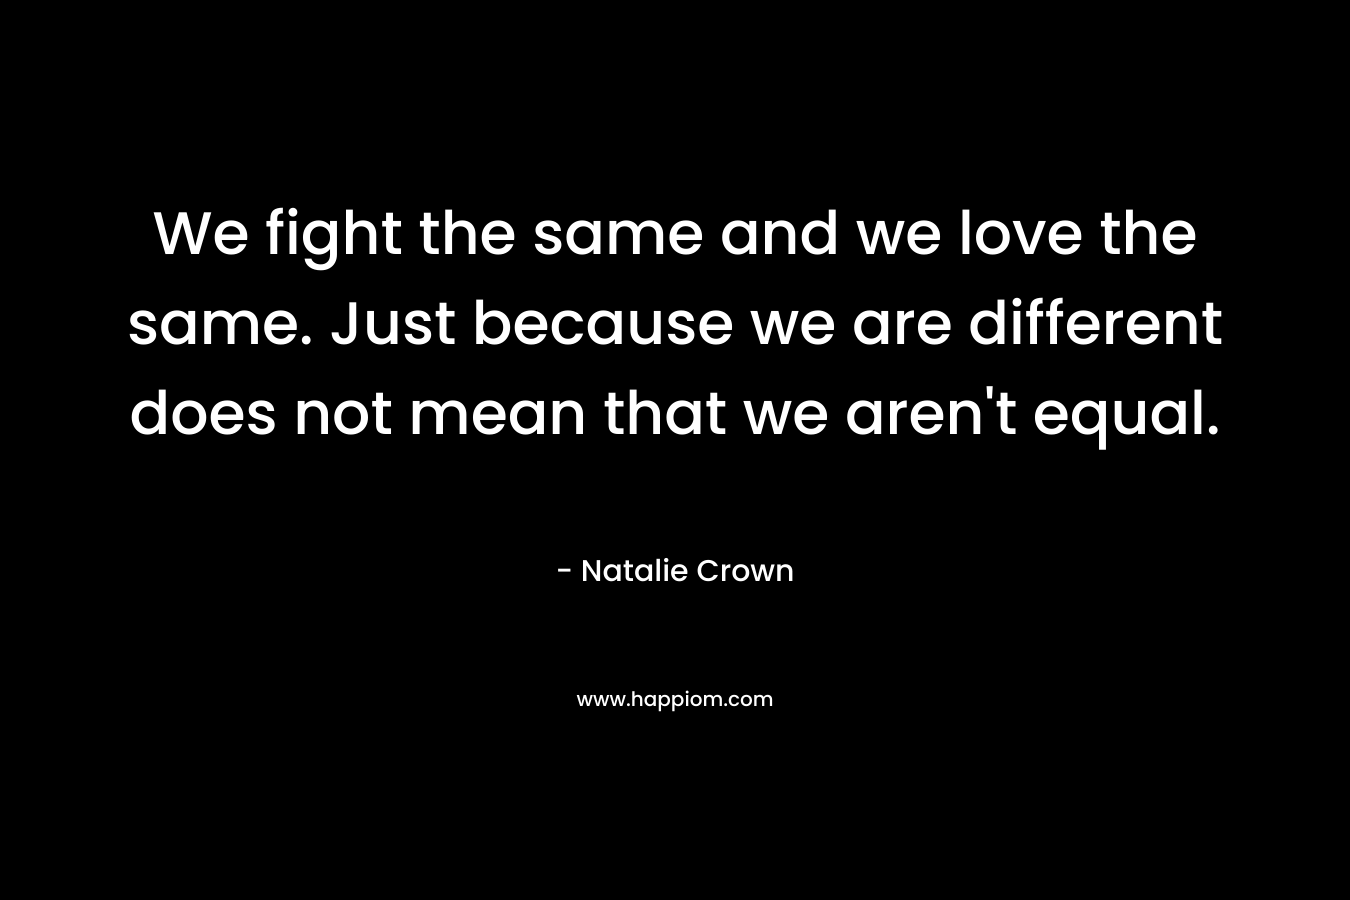 We fight the same and we love the same. Just because we are different does not mean that we aren't equal.